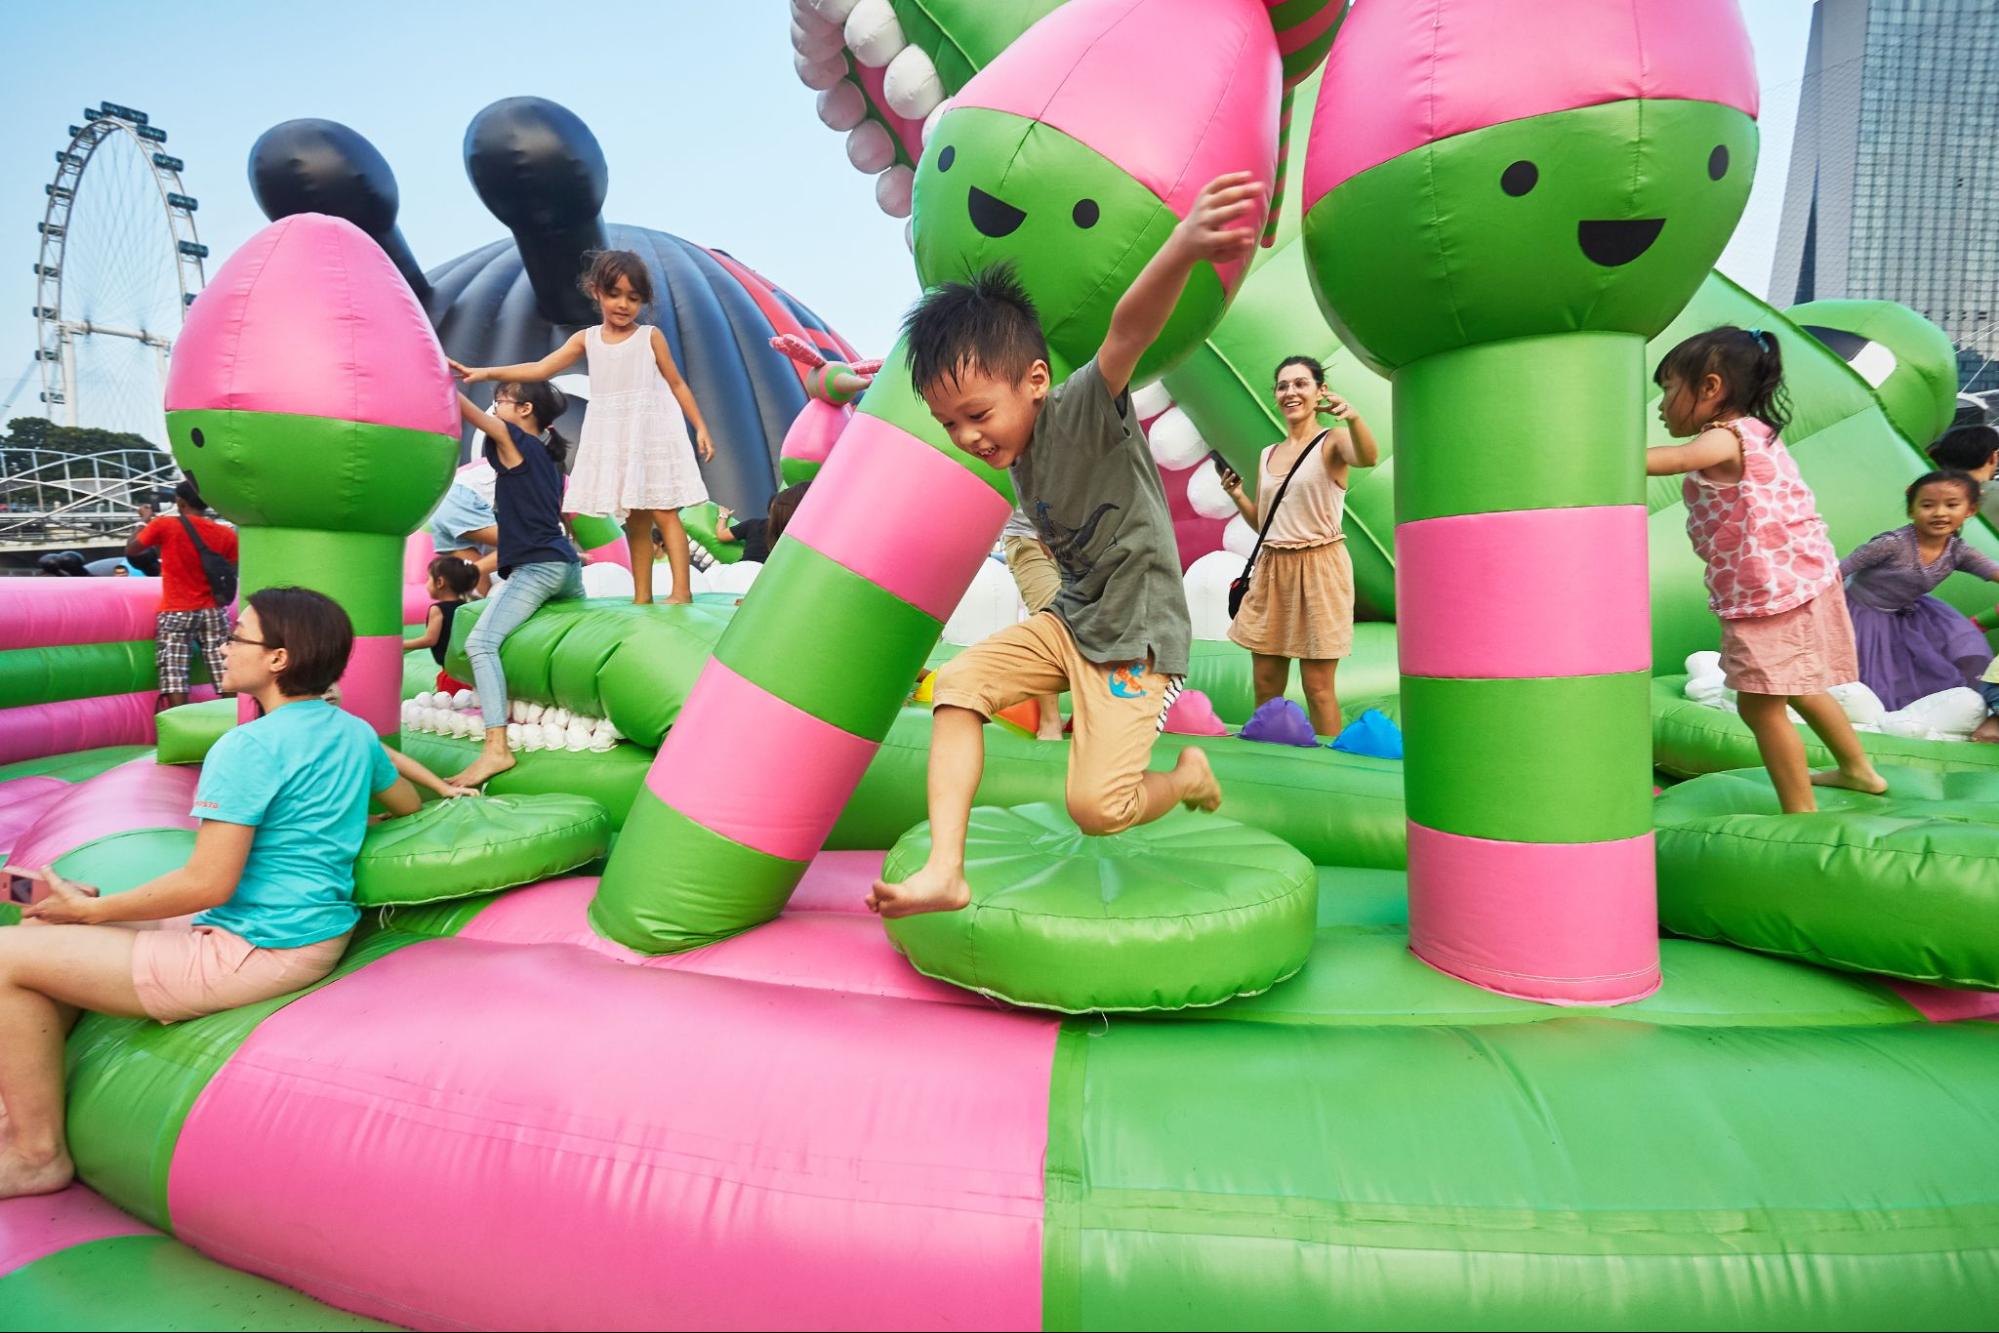 good design research - inflatable park